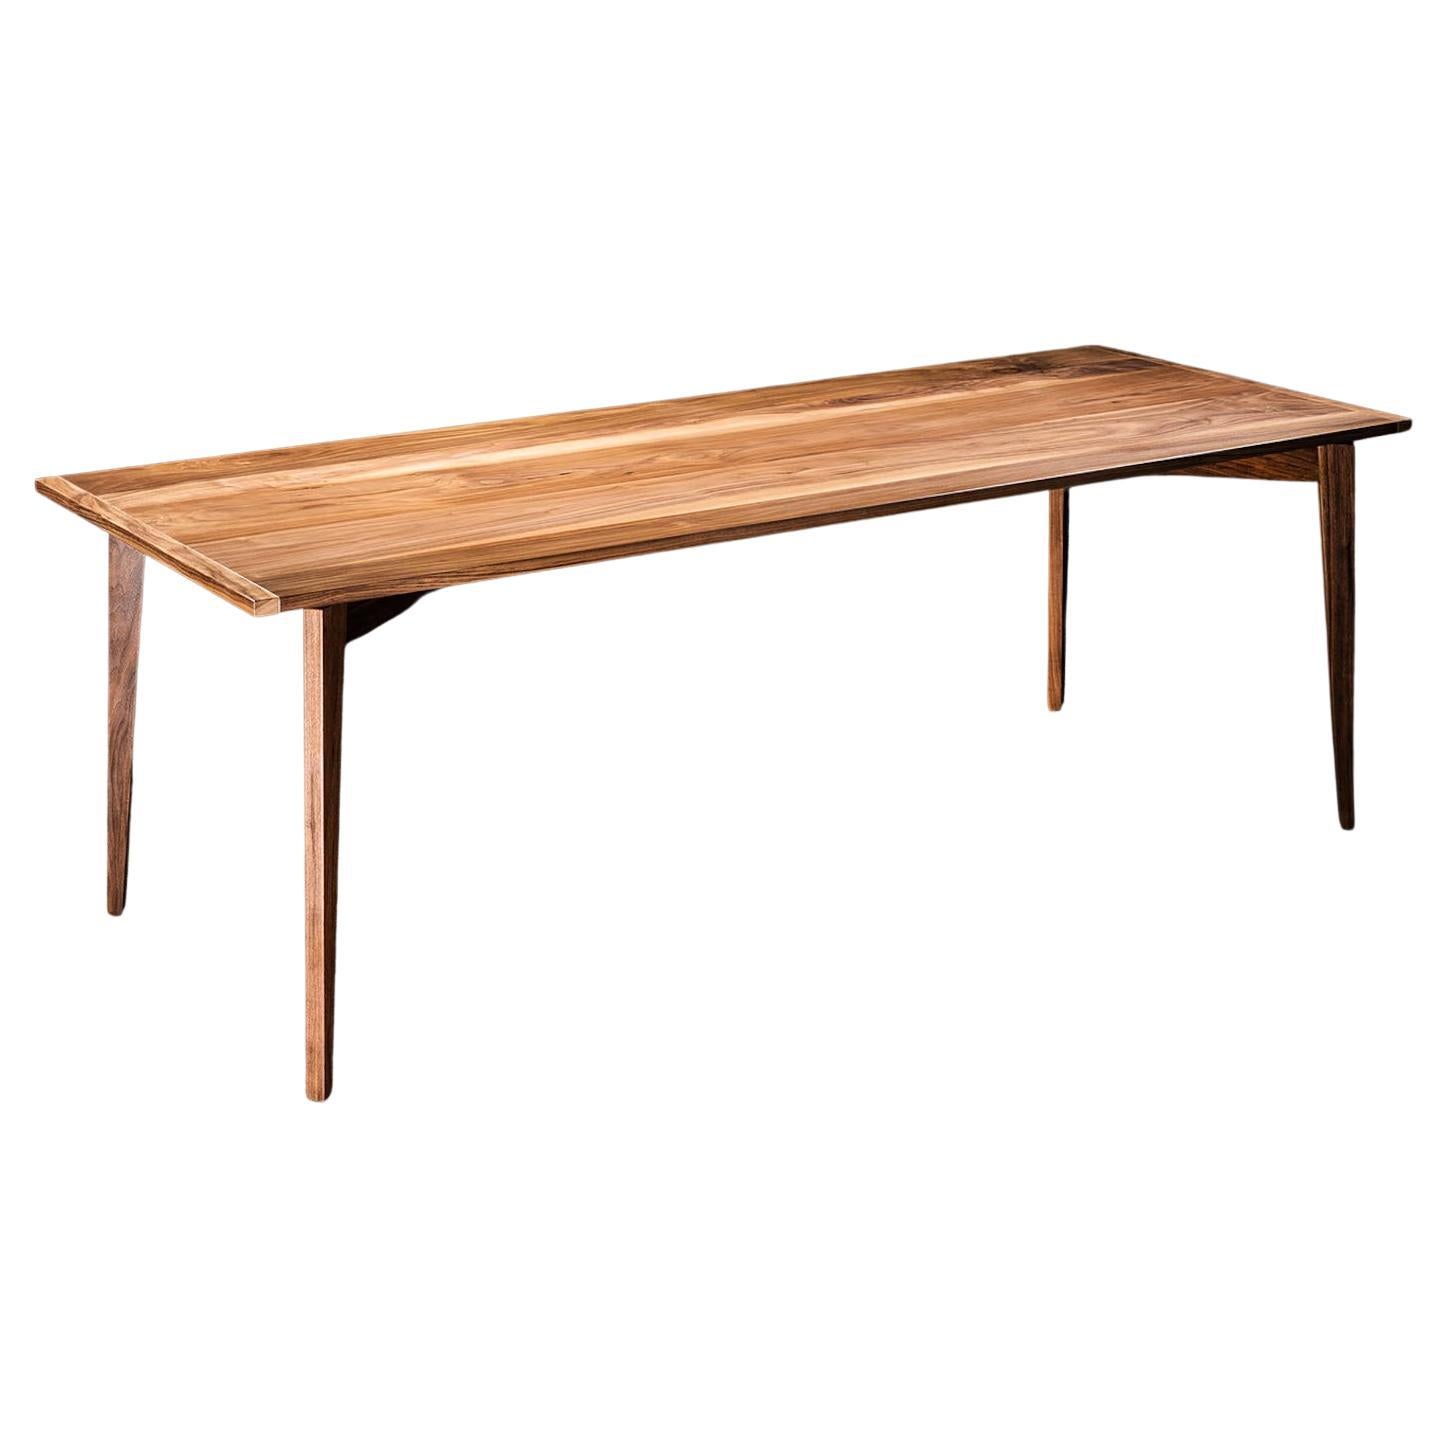 "Charis" Mid-Century Modern Styled Solid Walnut Dining Table - Minimalist For Sale